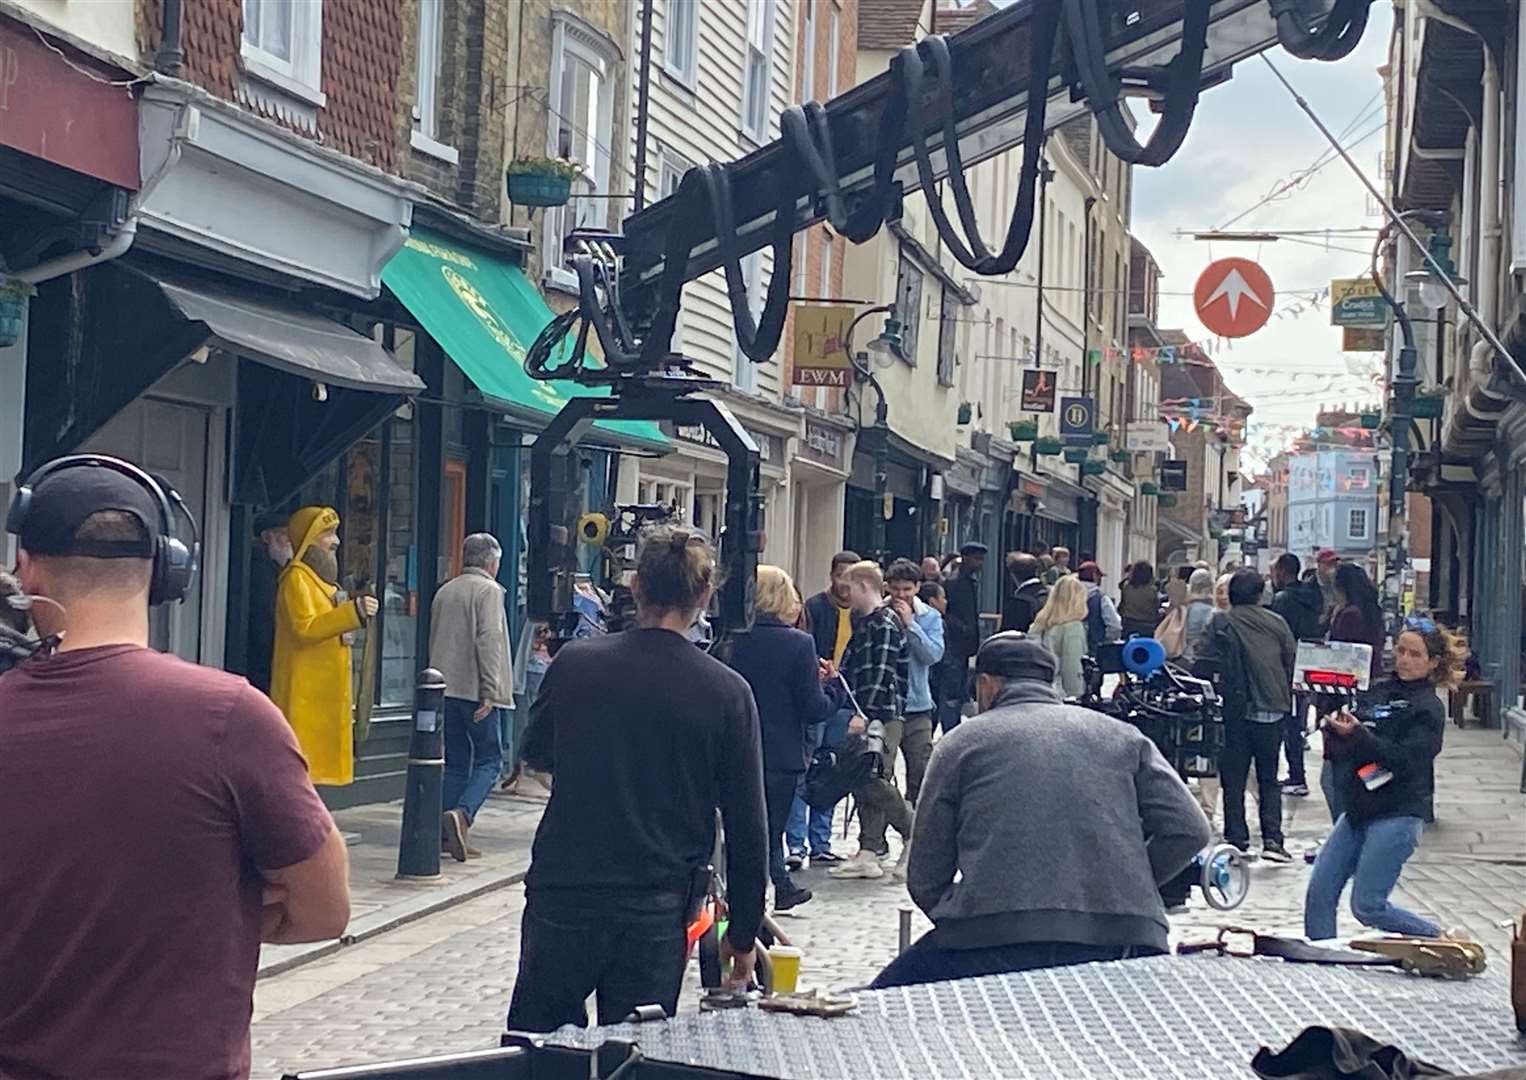 Filming in Canterbury earlier this year for a production featuring Handmaid’s Tale star Elisabeth Moss